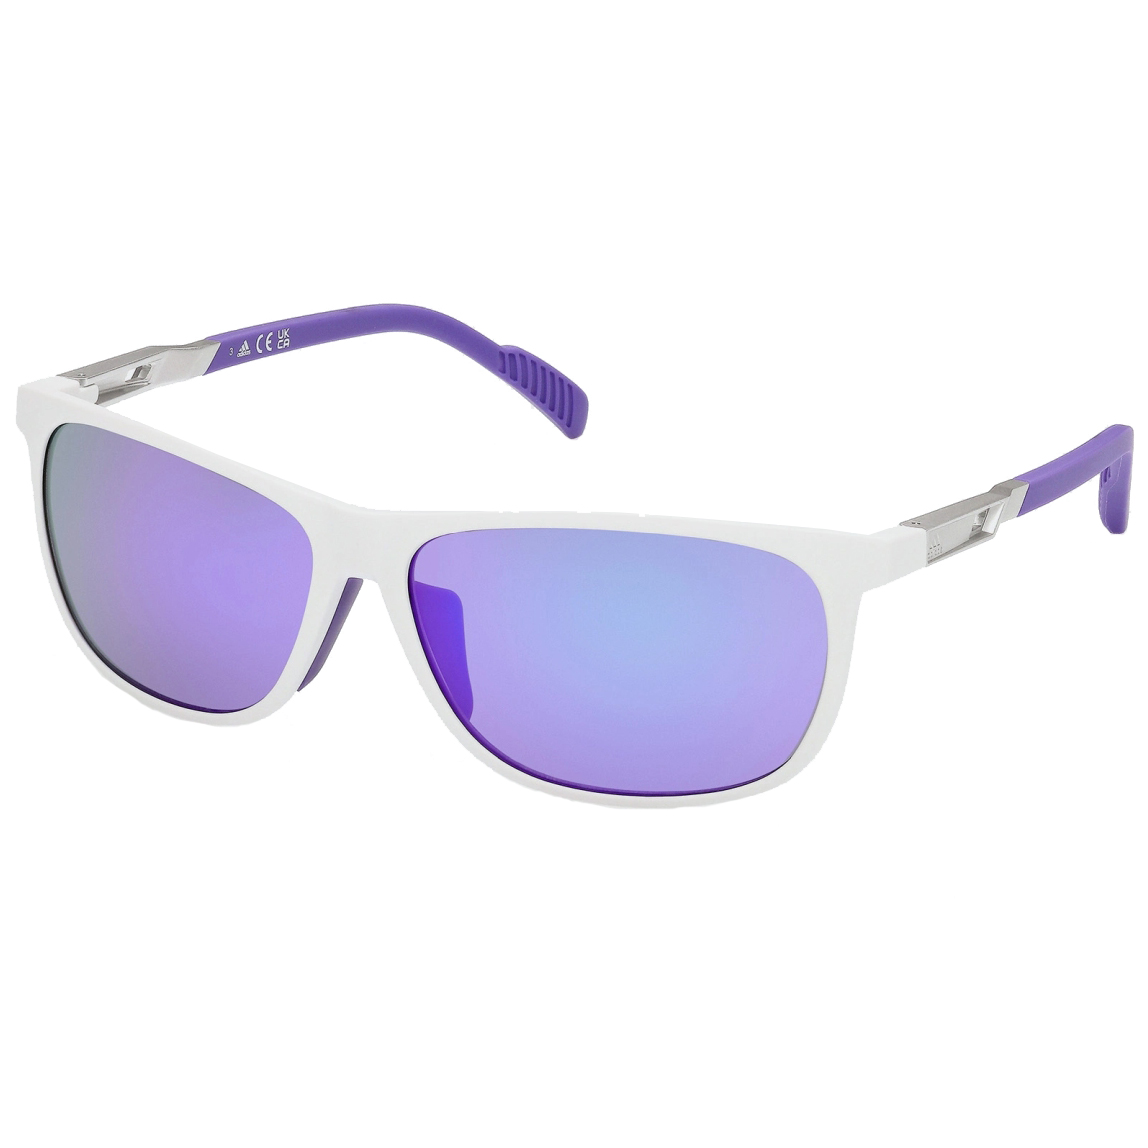 Image of adidas Actv Future Ultra-Lite SP0061 Sport Sunglasses - White/Other / Contrast Mirror Violet